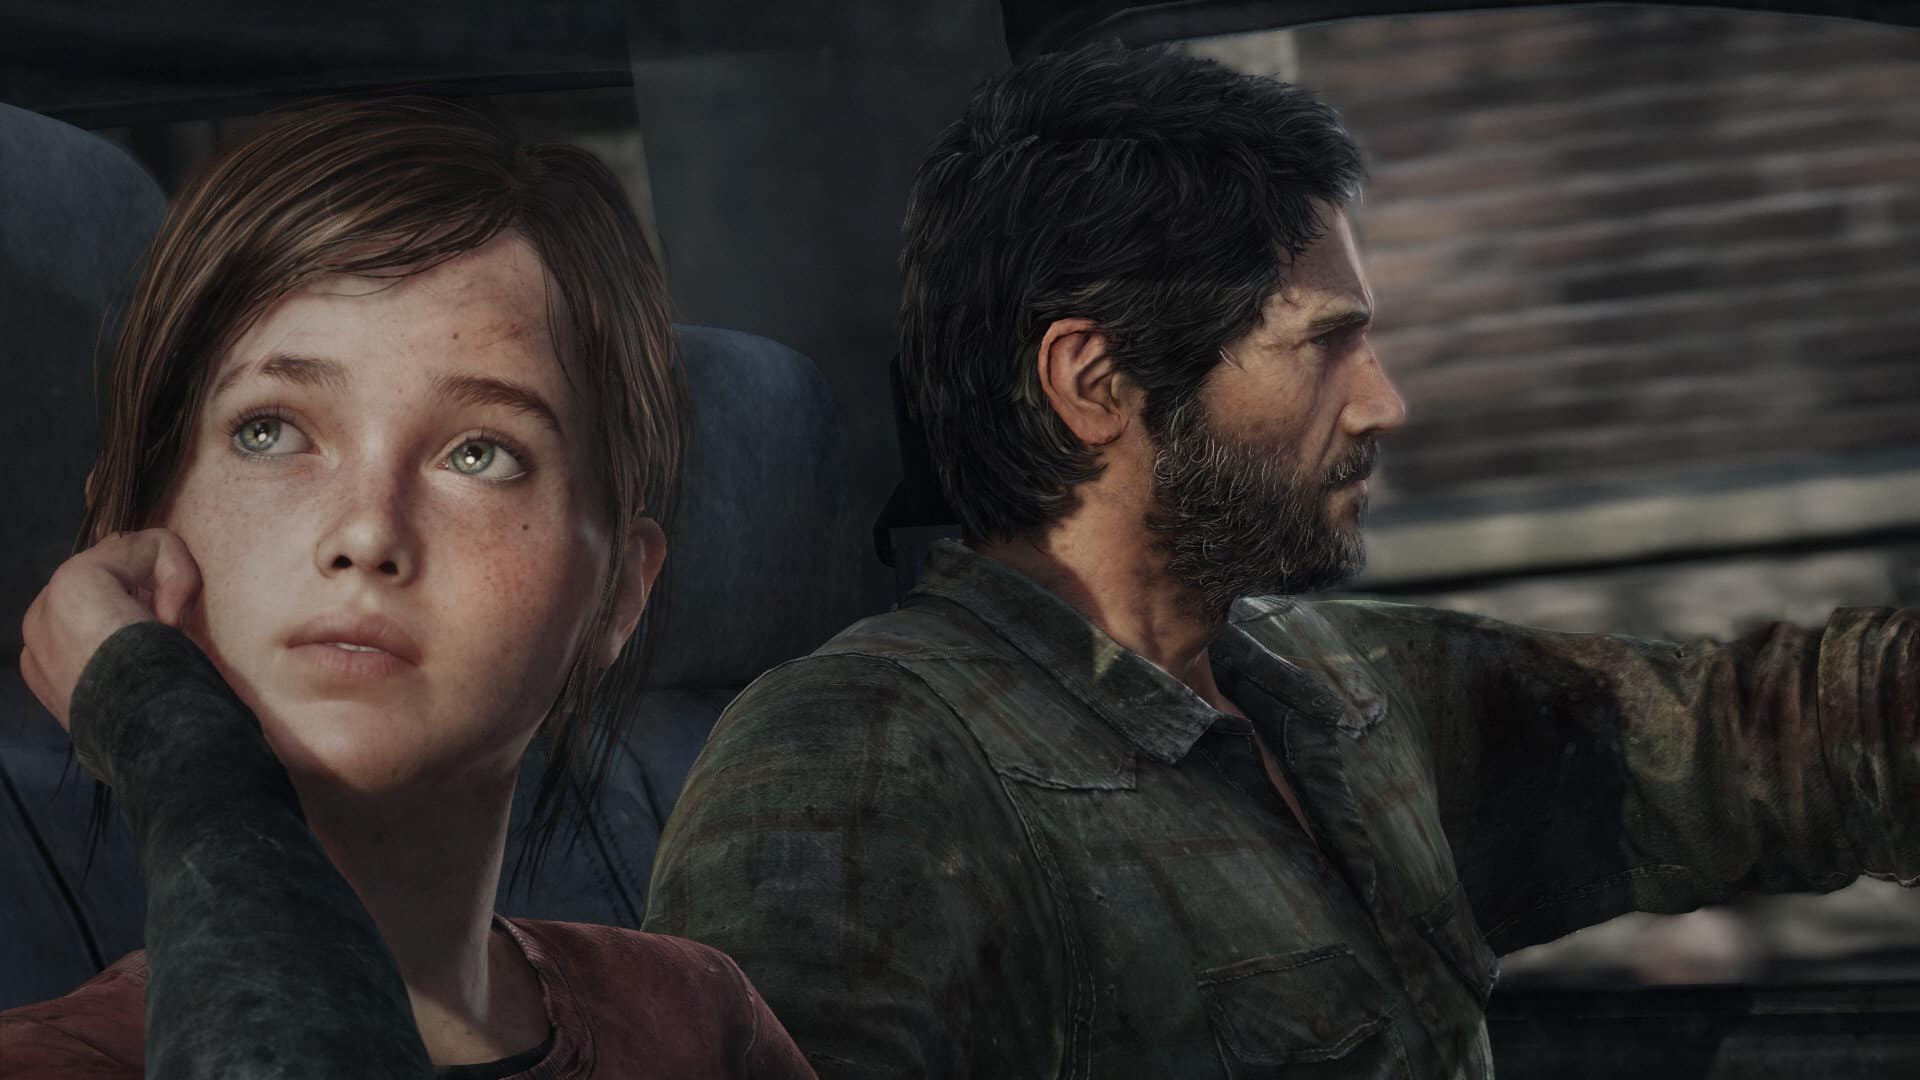 Naughty Dog scrambles to stop The Last of Us leaks